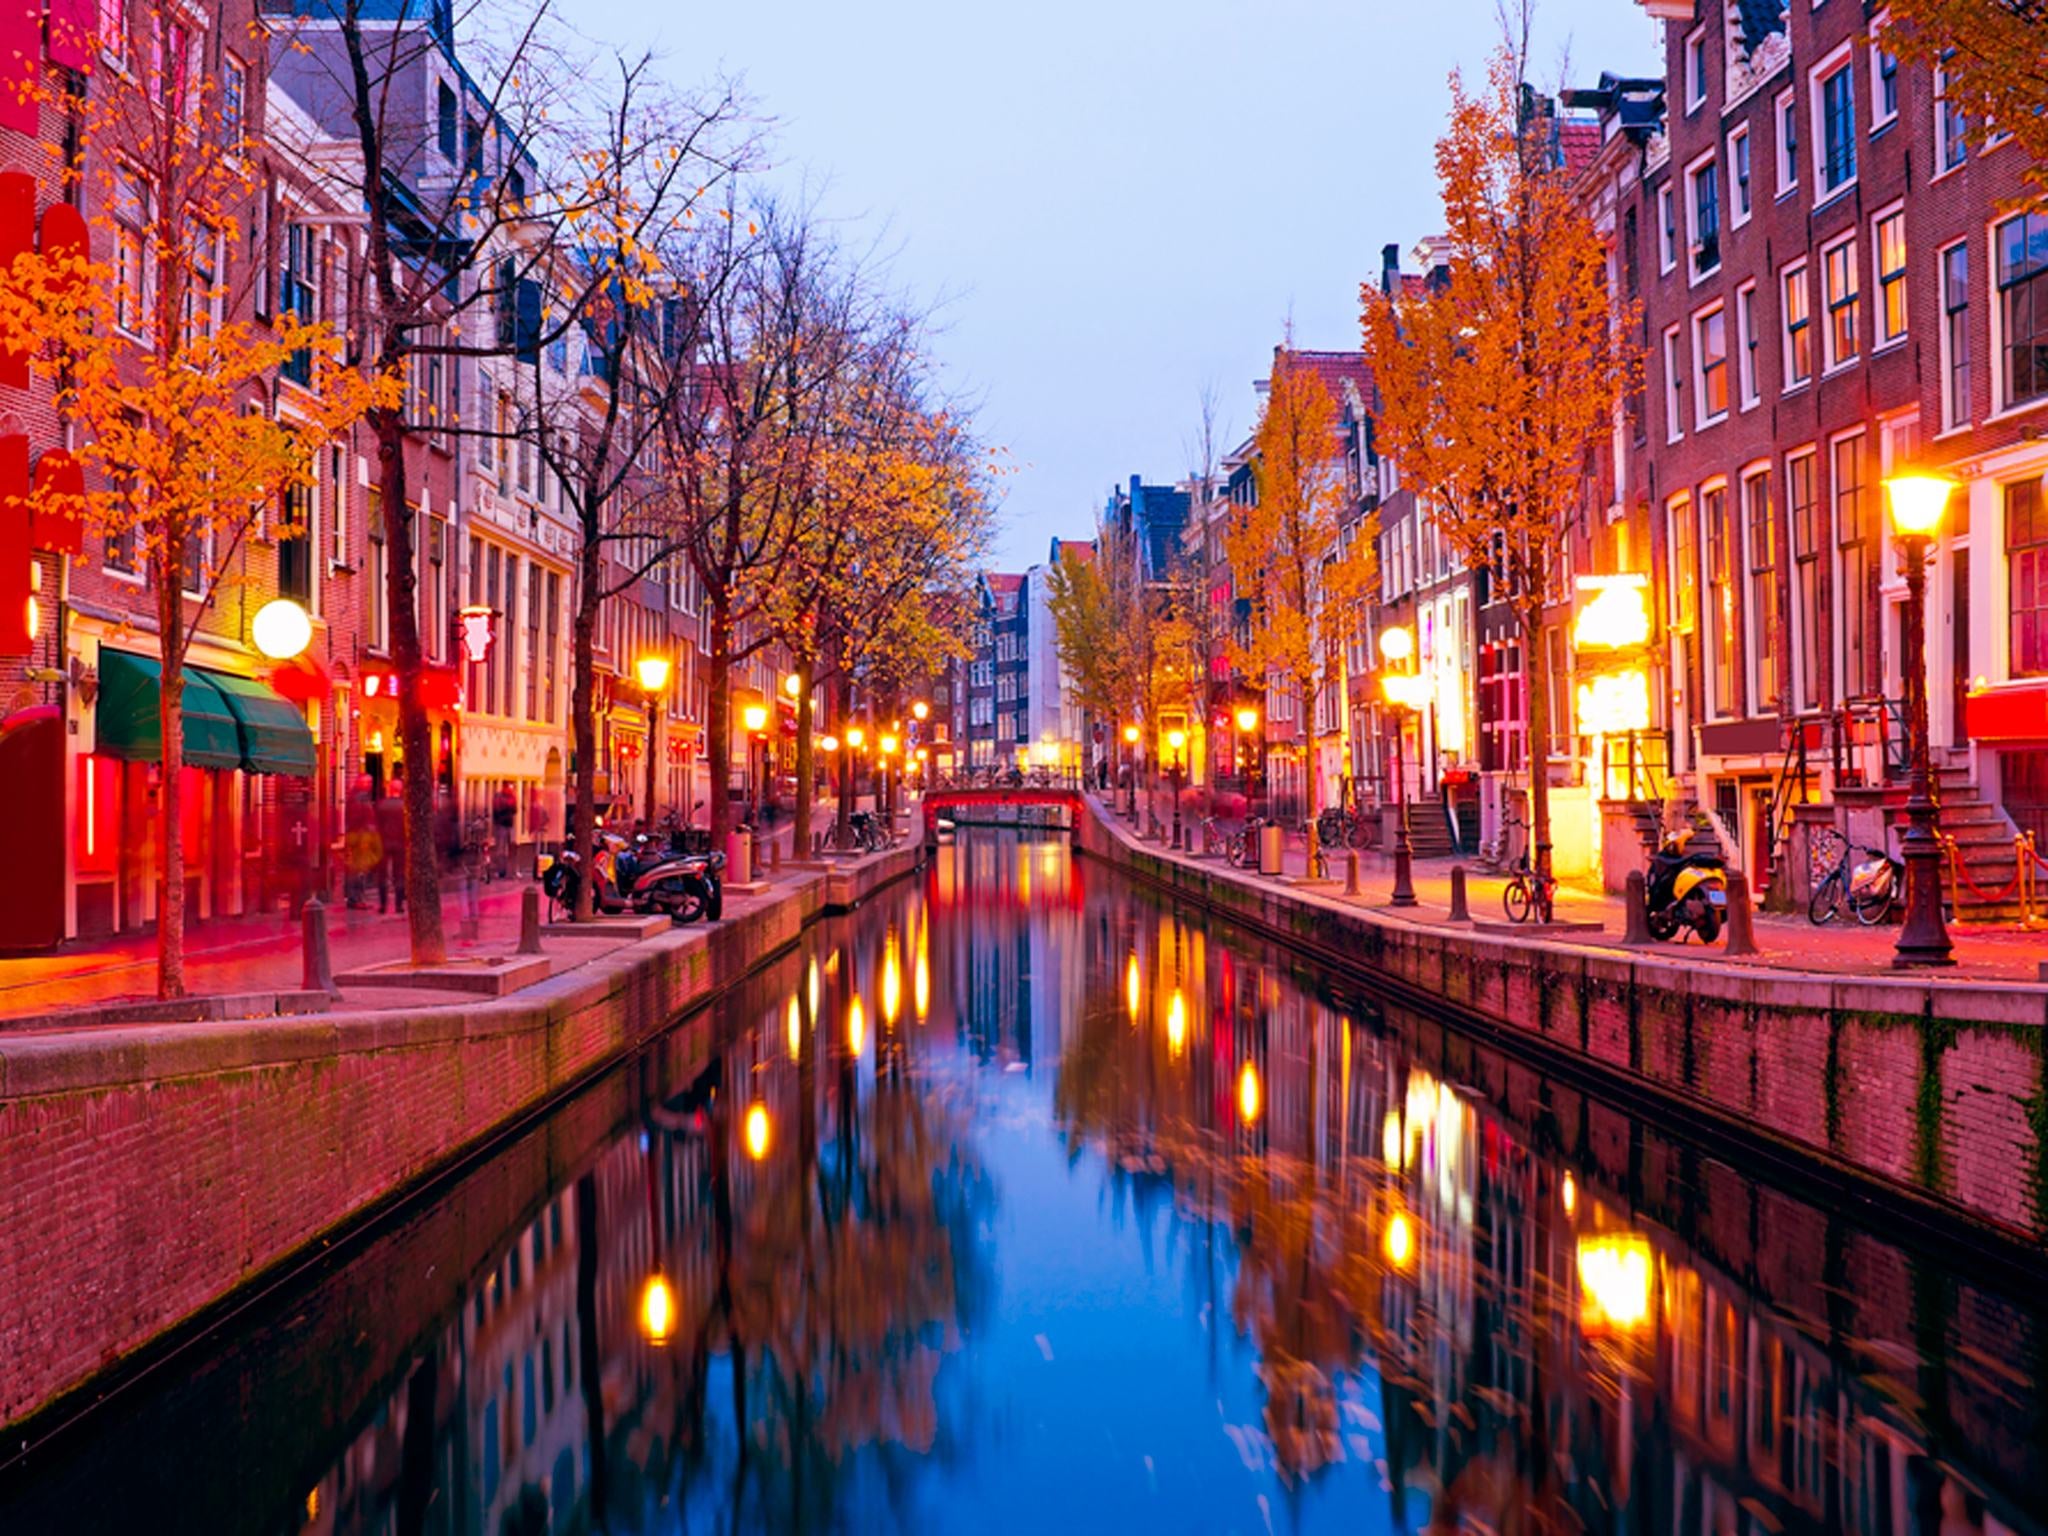 The red light district in Amsterdam